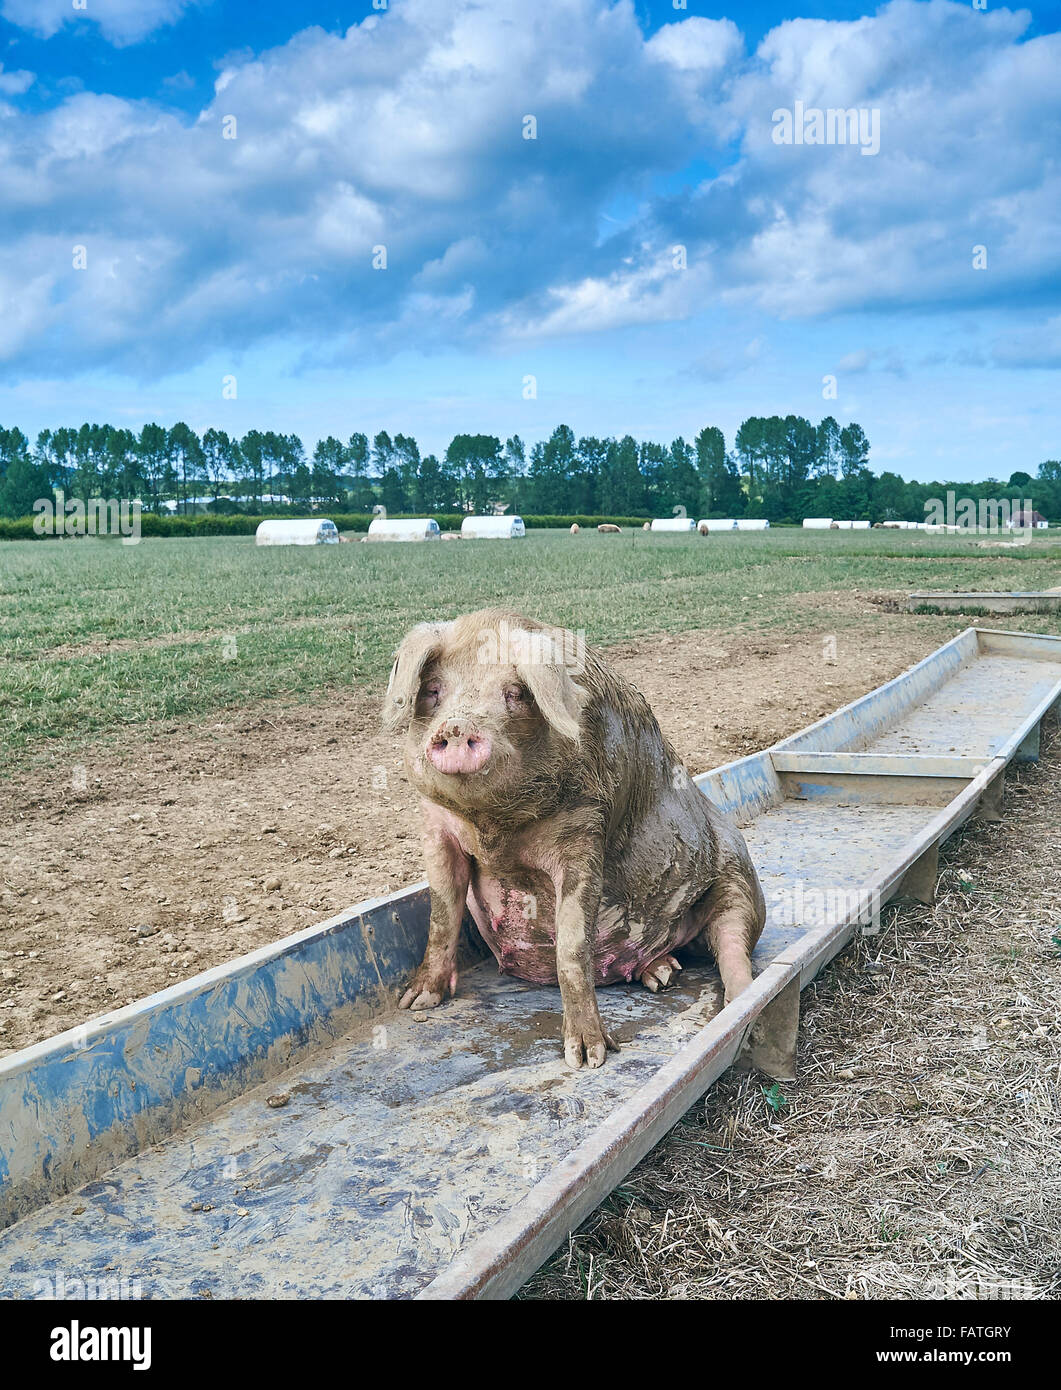 A tired old organically reared free range sow pig rests in her trough in a field Stock Photo